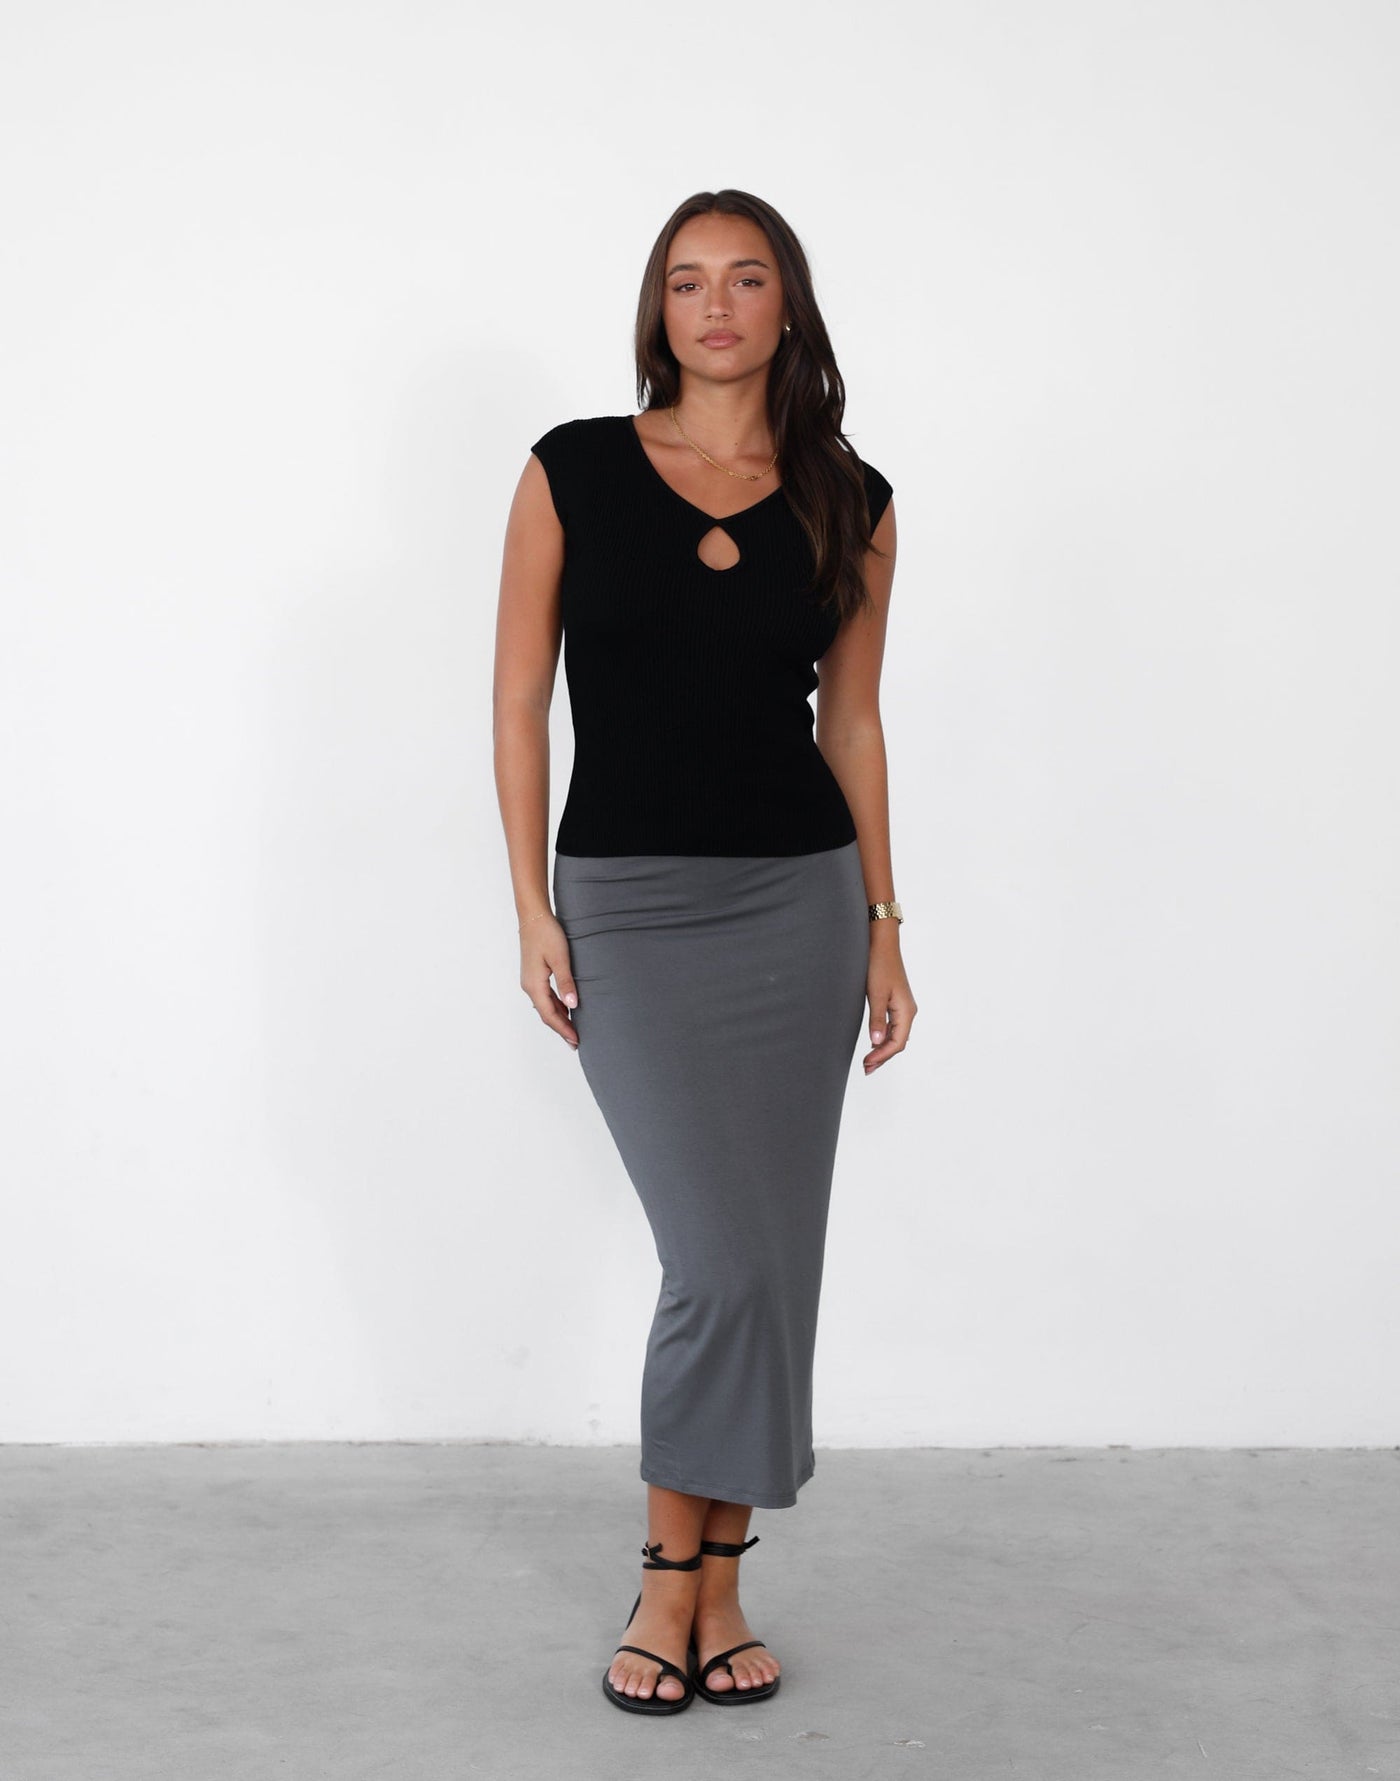 Clerisse Midi Skirt (Charcoal) - FItted Bodycon Midi Skirt - Women's Skirt - Charcoal Clothing